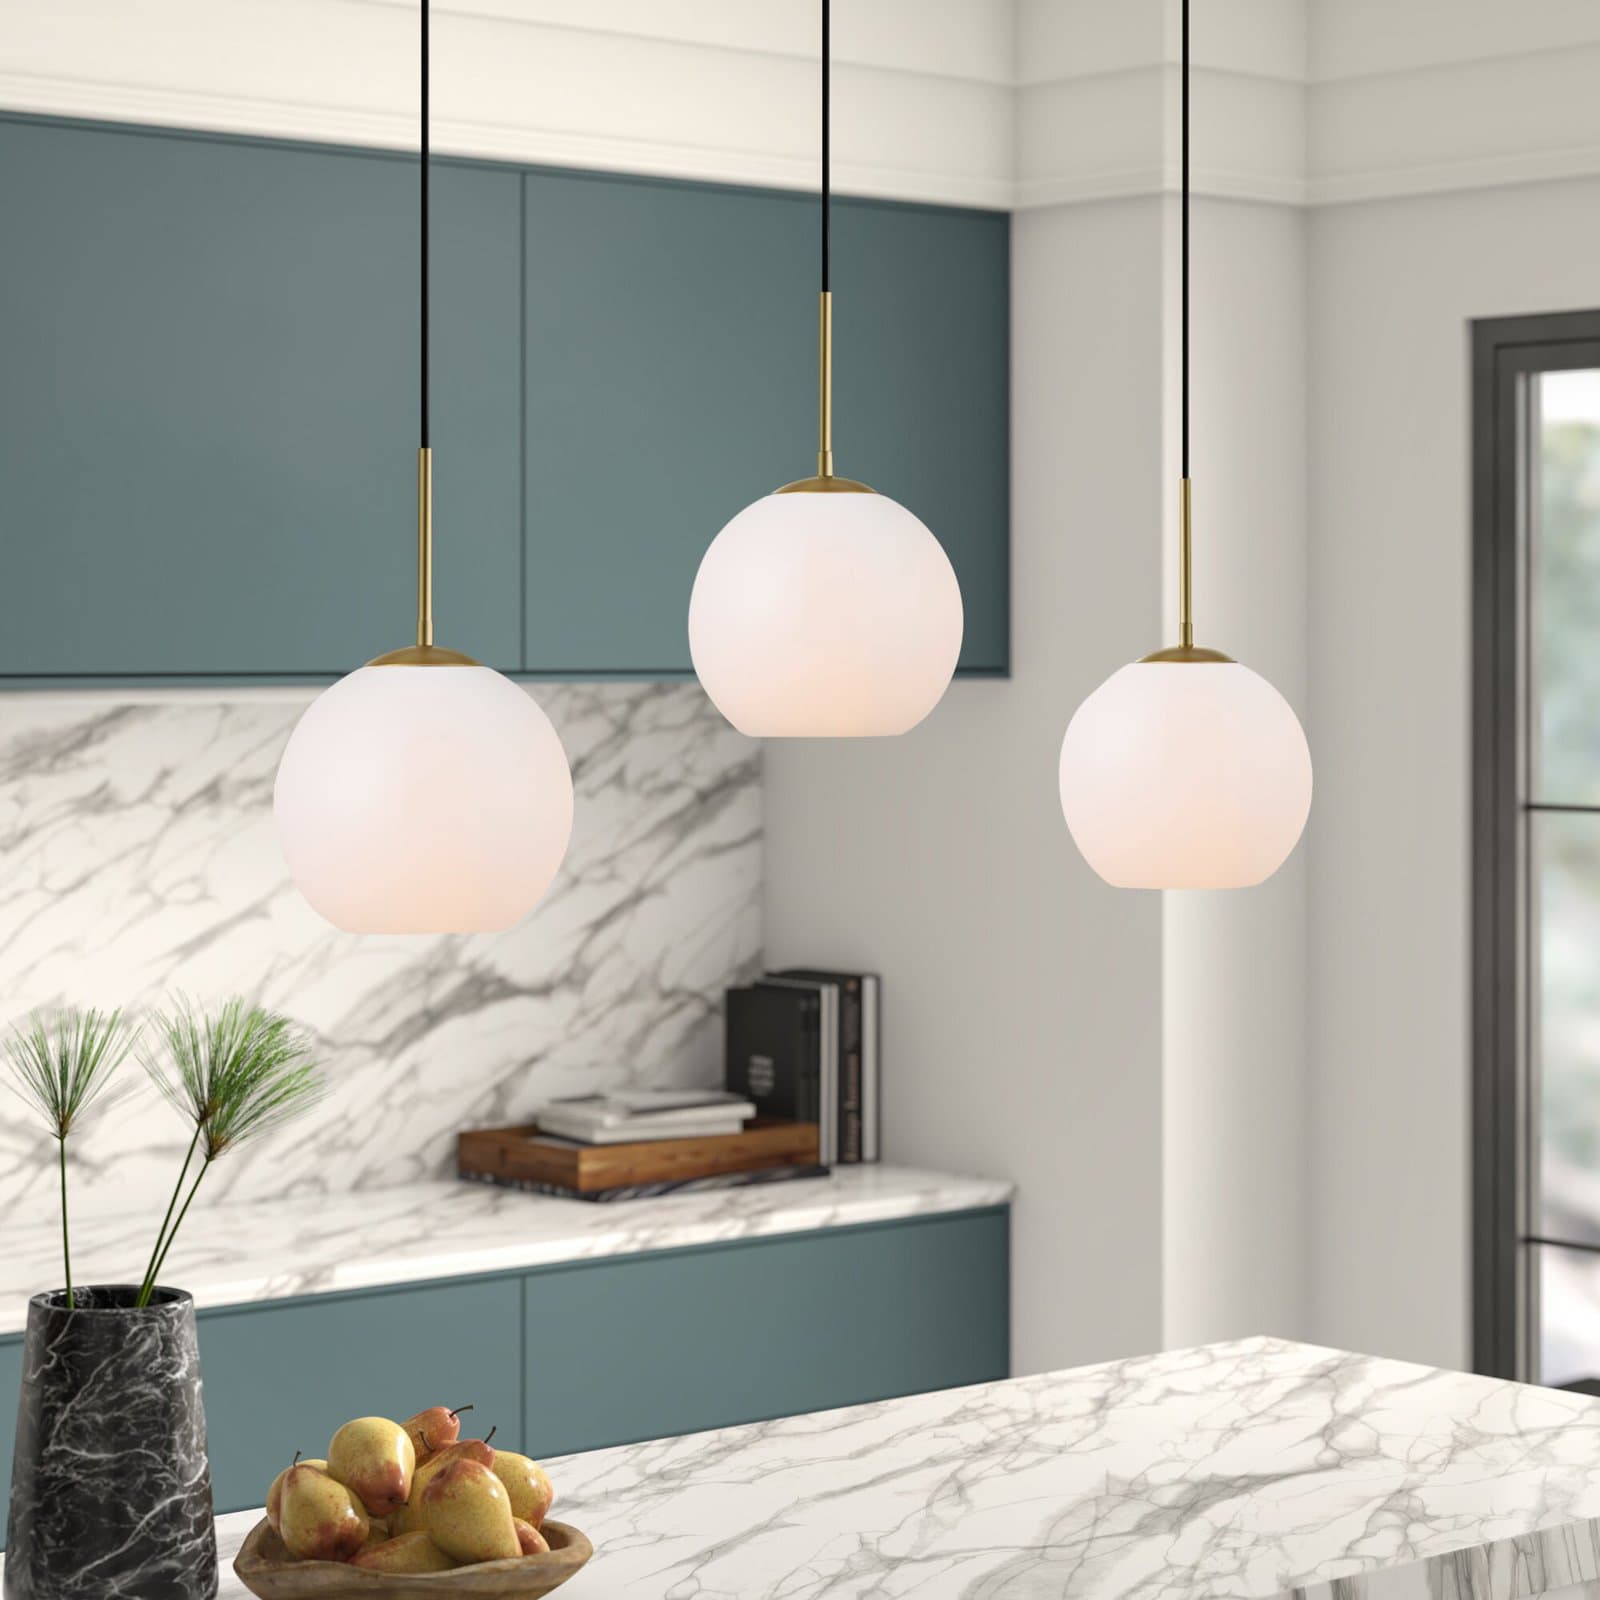 Use a Linear Fixture to Stagger Pendant Lengths